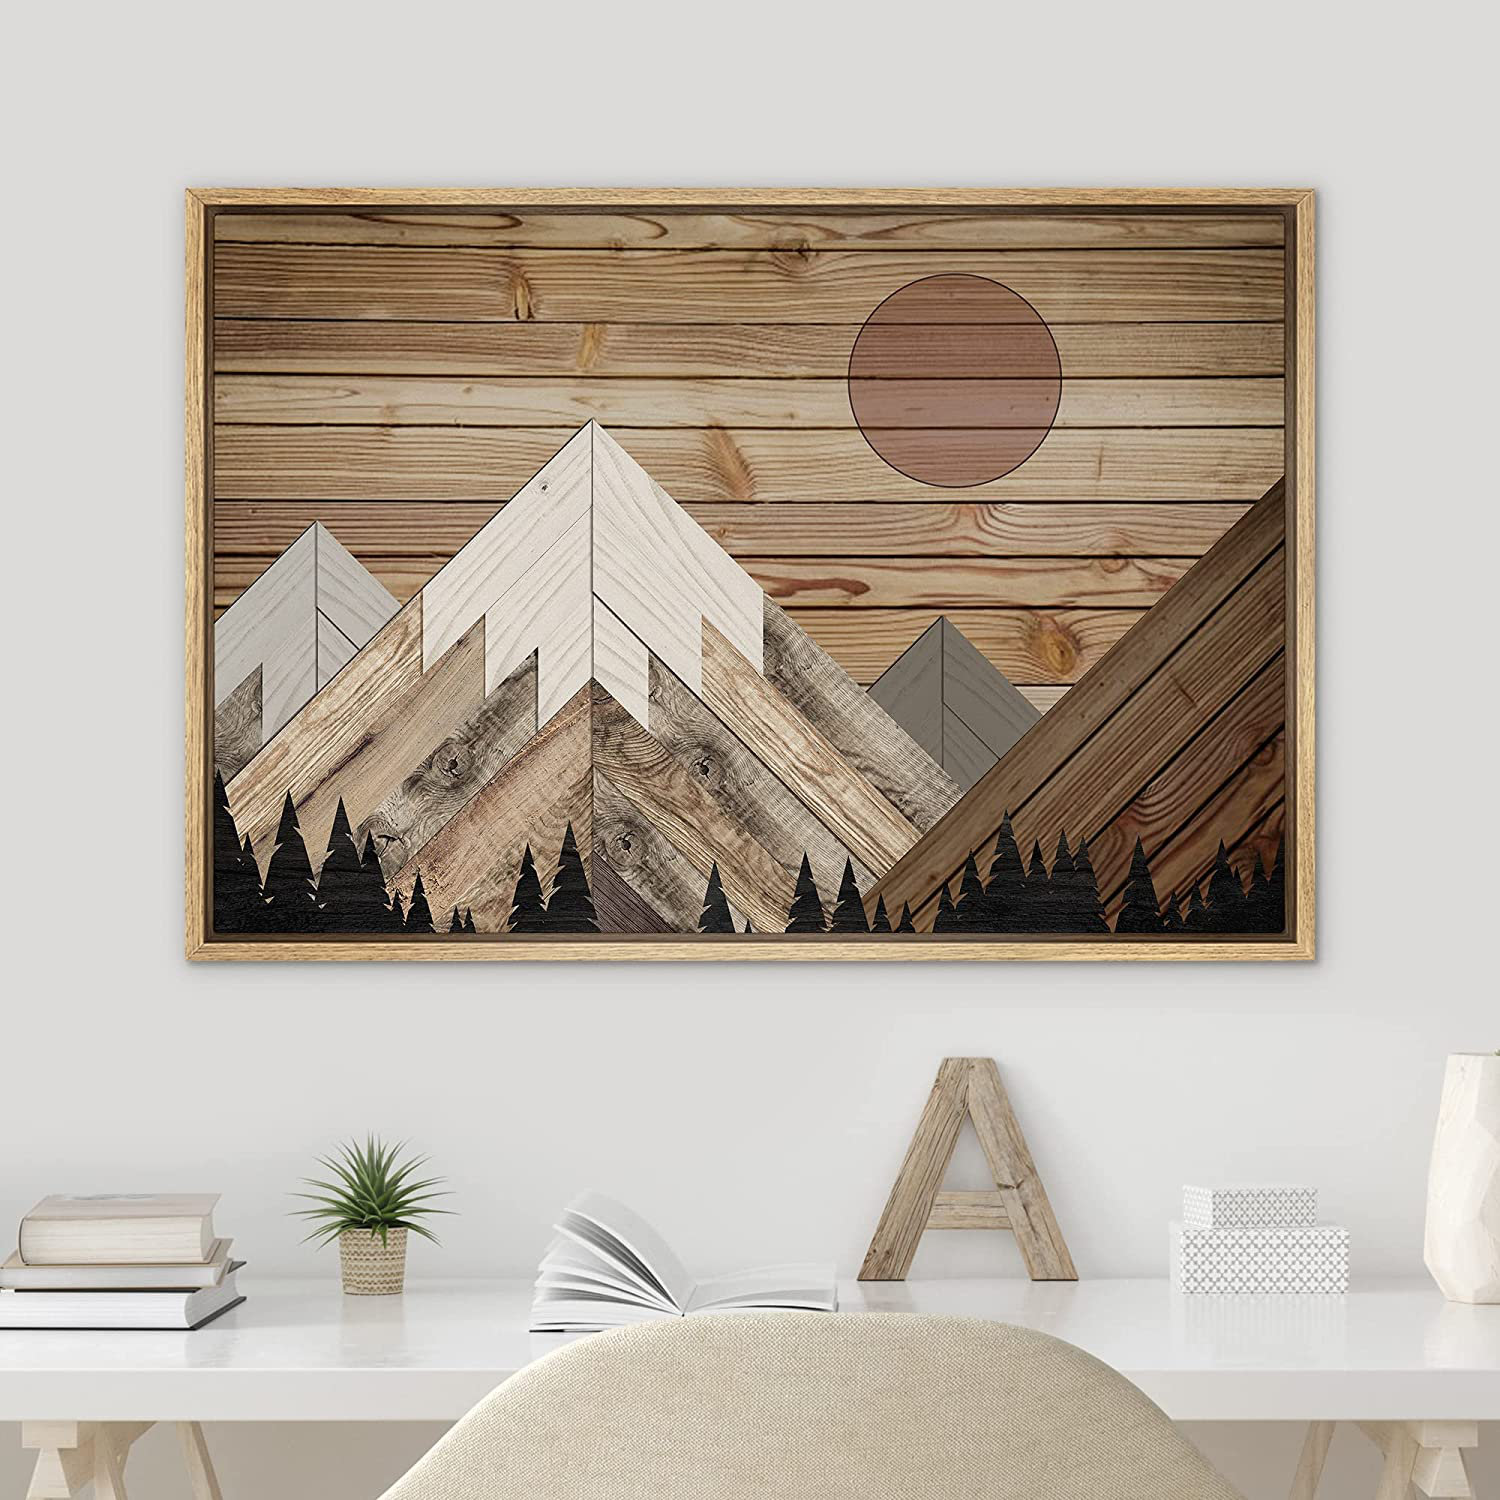 6 Pretty Wood Panel Art For Home Decor - Painting Ideas For Beginner 